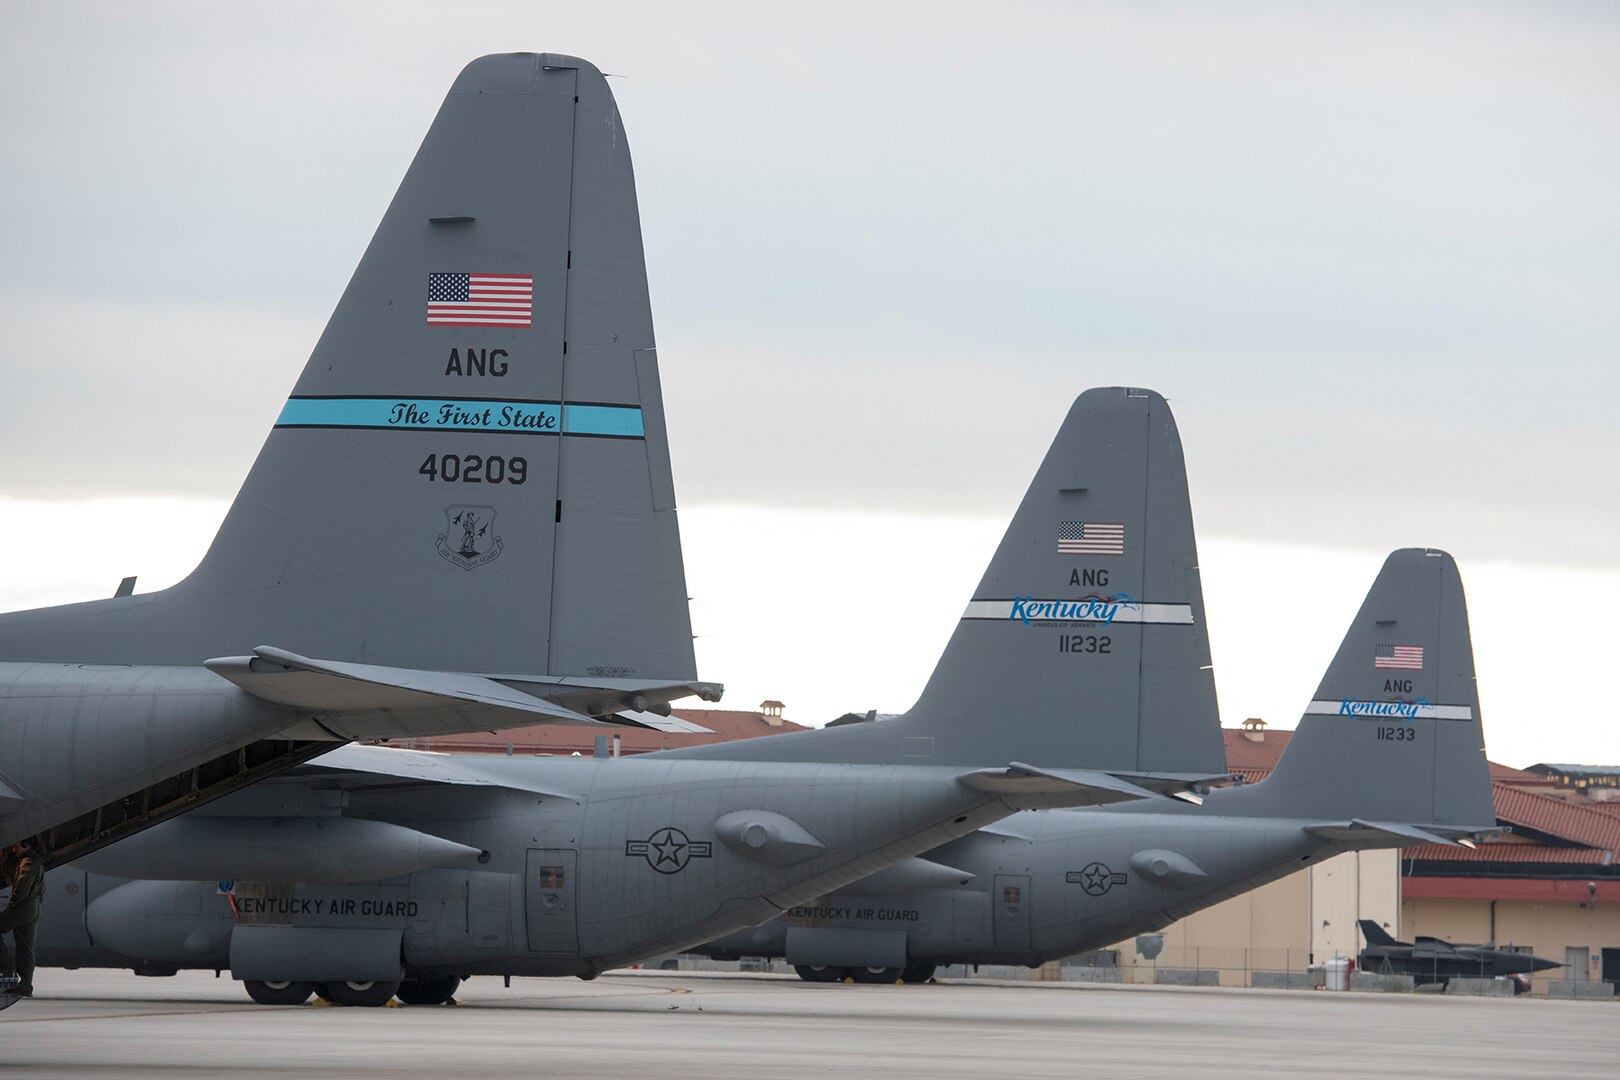 A C-130H Hercules aircraft, operated by the 142nd Airlift Squadron, 166th Airlift Wing, Delaware Air National Guard New Castle Air Guard Station, Delaware, sits on the flight line at Aviano Air Base, Italy, May 9, 2019, in preparation for Exercise Immediate Response 2019. The 166th AW is one of three Air Force C-130 units participating in the exercise, which is designed to rain airborne forces and enhance interoperability among allied and partner nations in Europe.